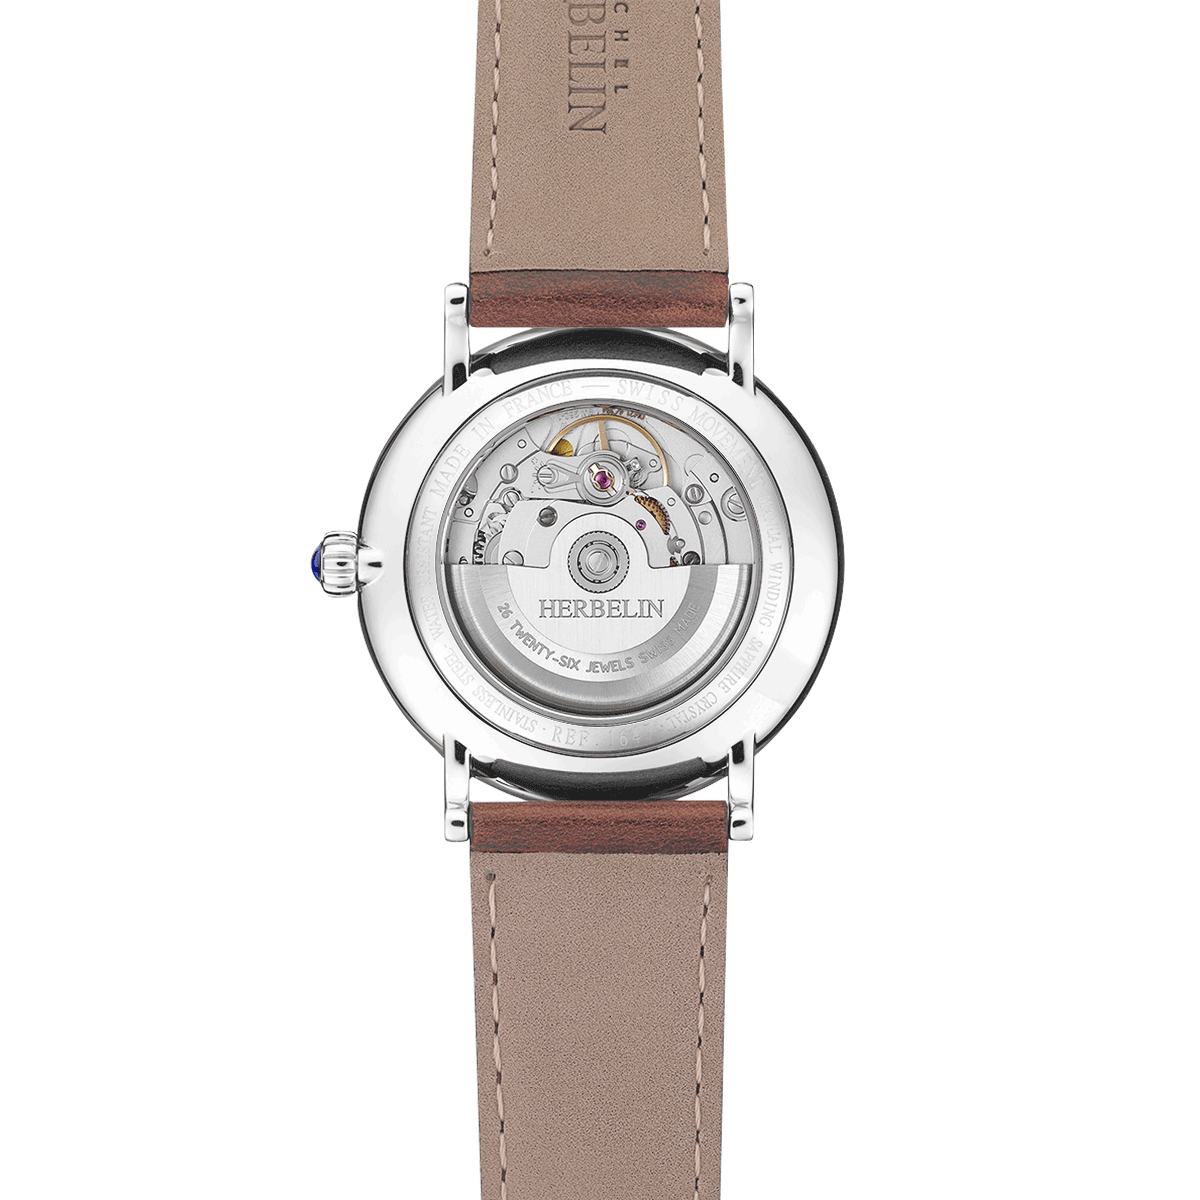 Mens Herbelin Inspiration Automatic Watch on Leather Strap